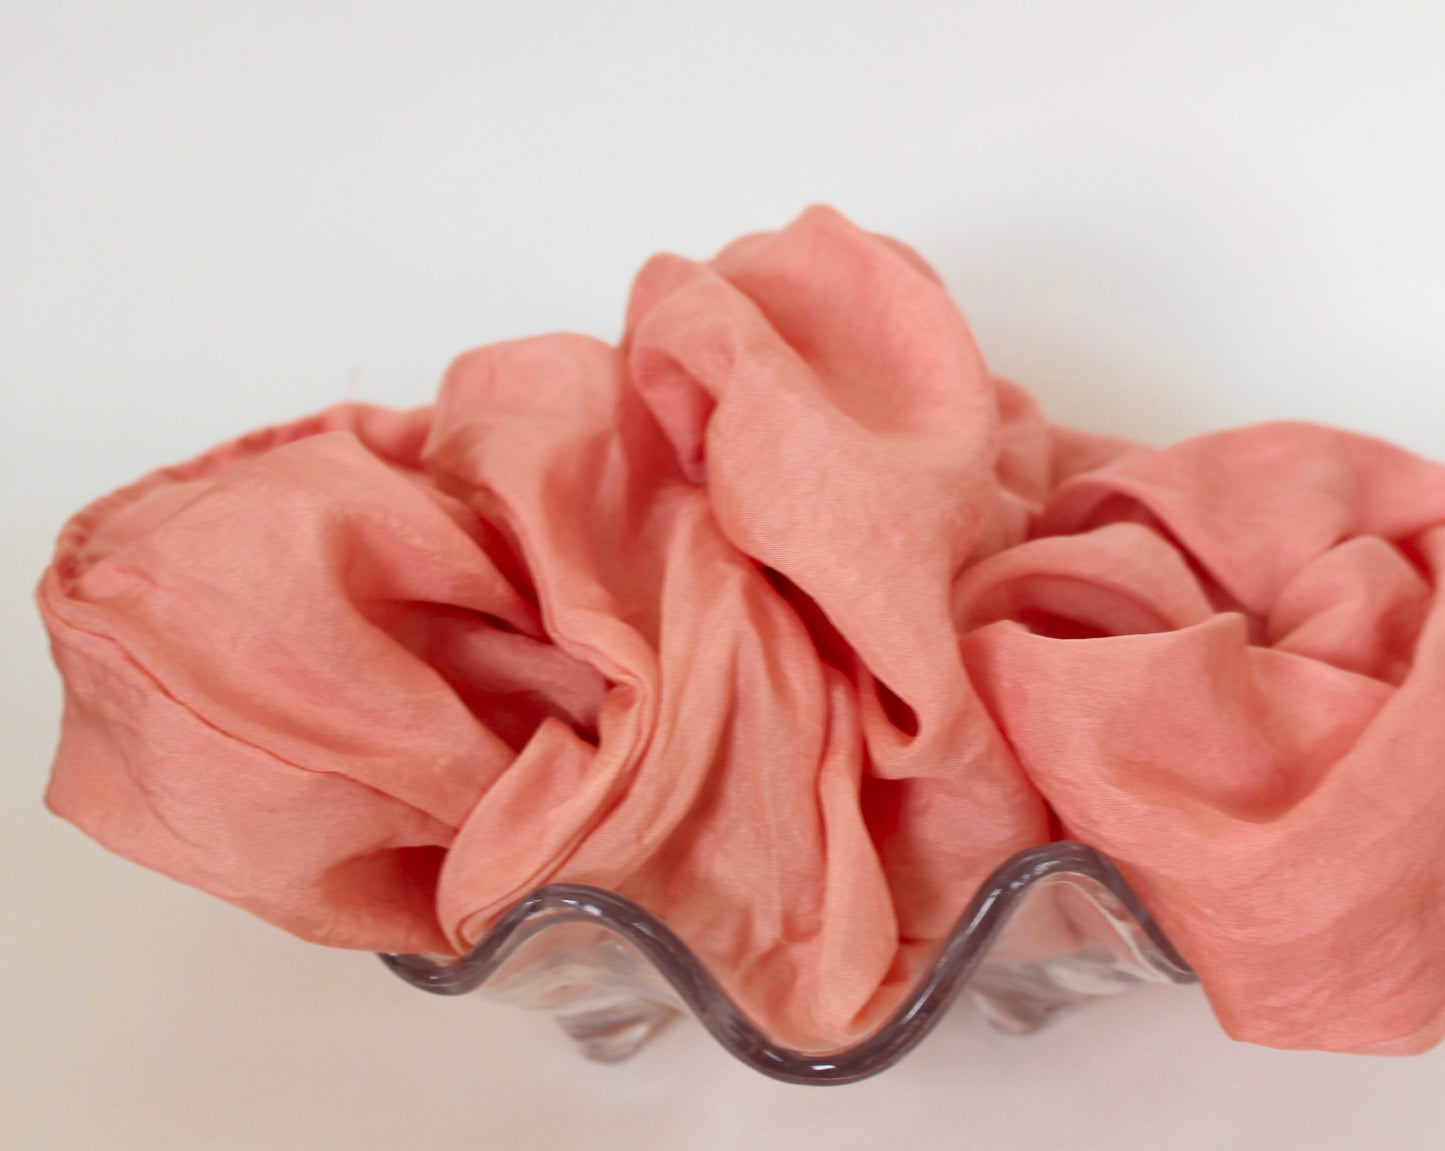 Goose Summer is a small, sustainable plant dyeing business making naturally dyed silk scrunchies and other accessories in Los Angeles. Pink Silk scrunchies in a clear seashell bowl.